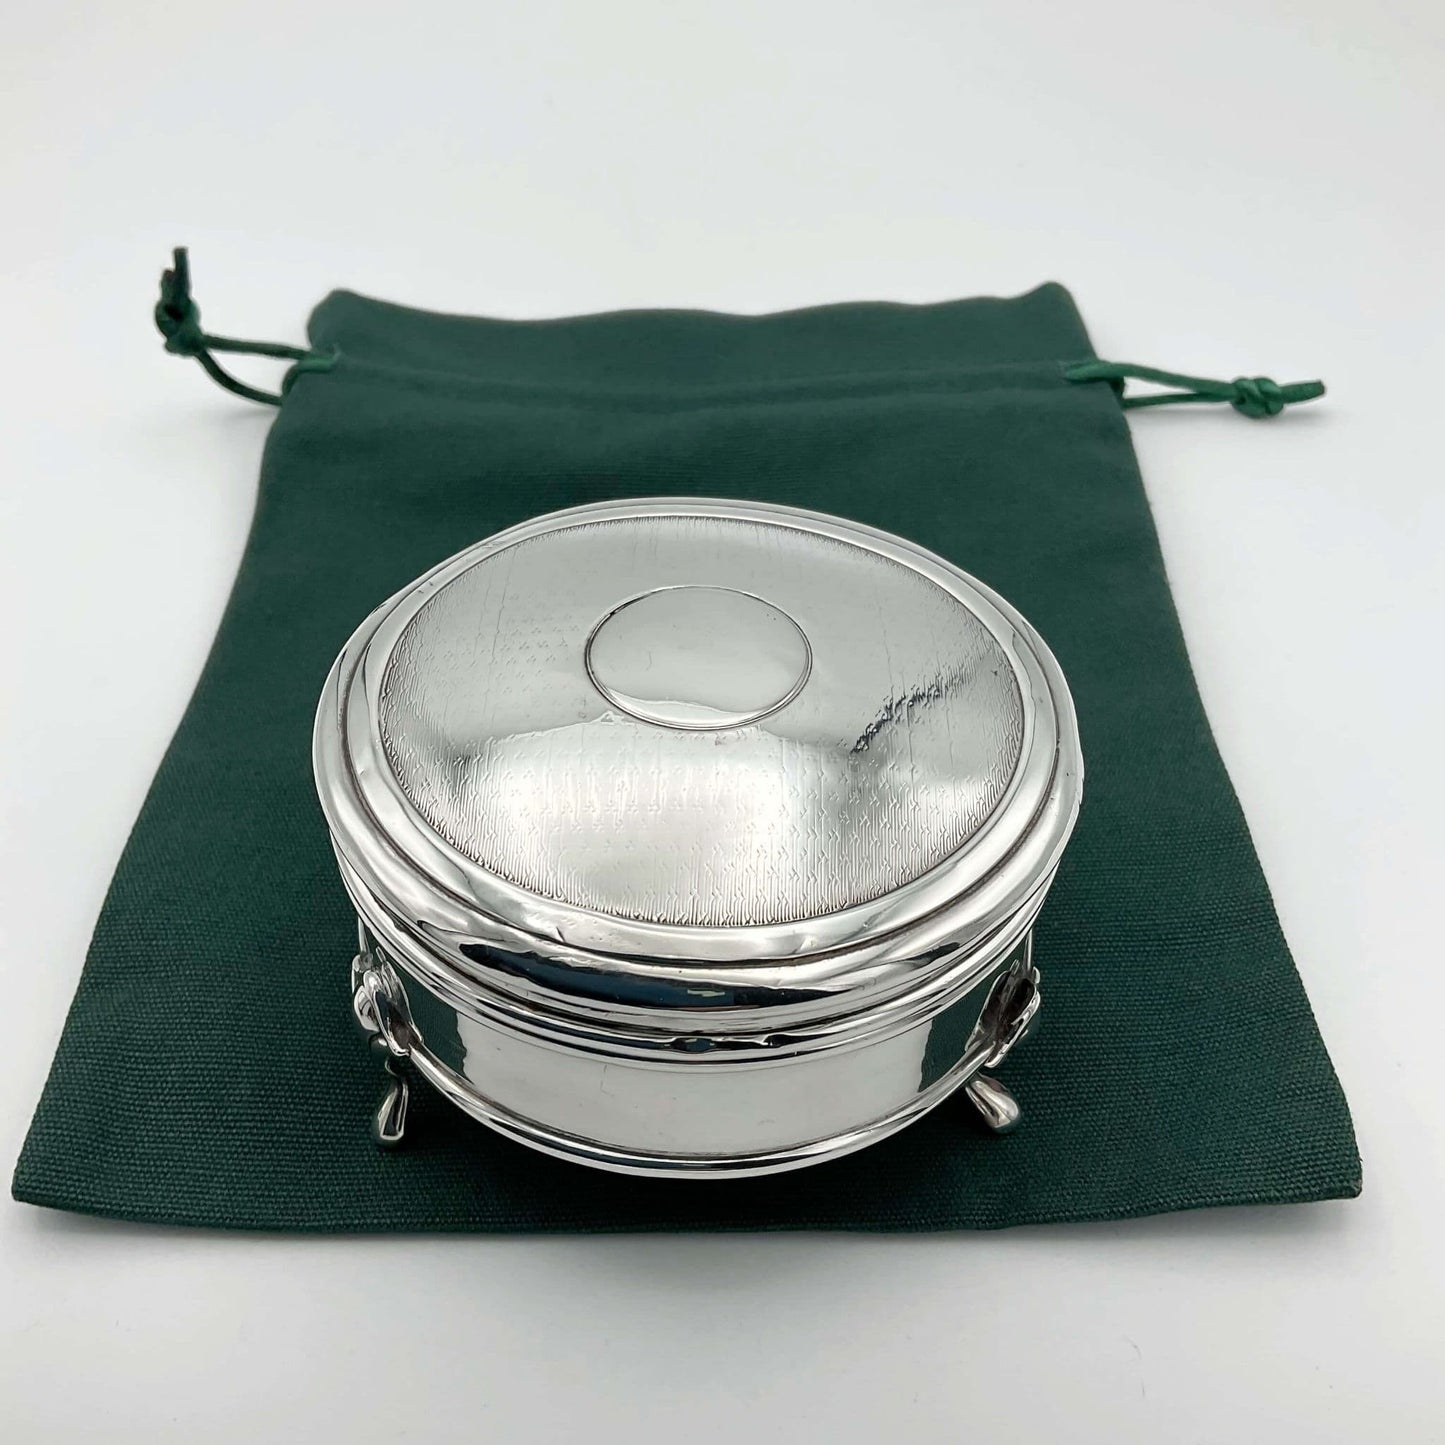 Round silver jewellery box with a pattern on the lid and legs standing on a green cotton bag.